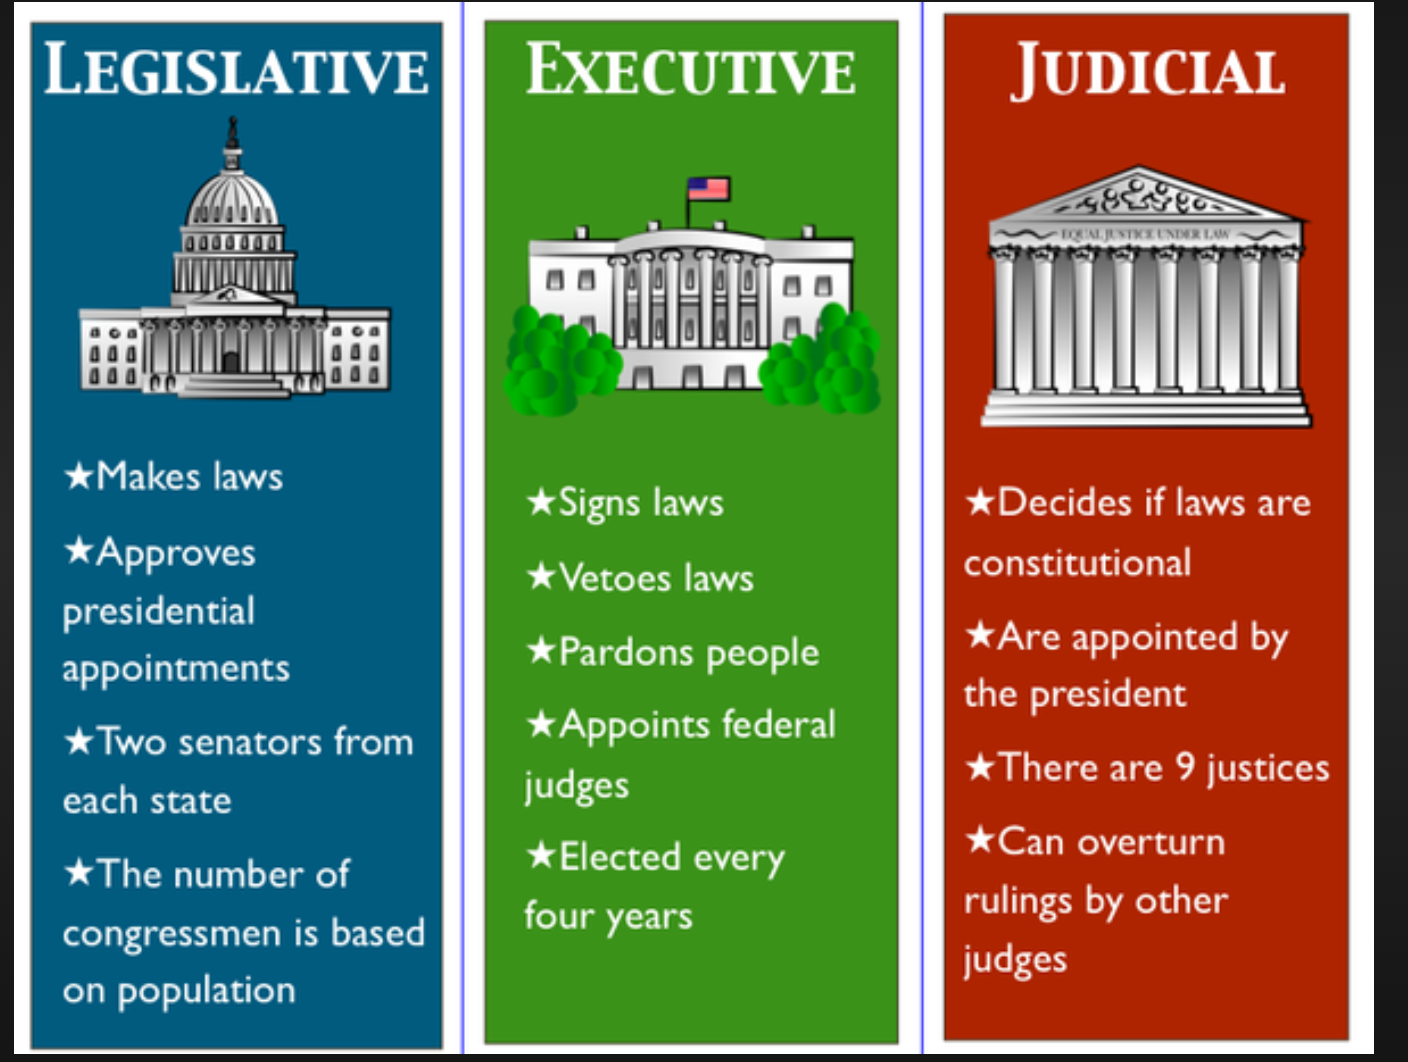 Government is the highest. Three Branches of government. Разделение властей США на английском. Branches of Power in the USA. Legislative Executive and Judicial.